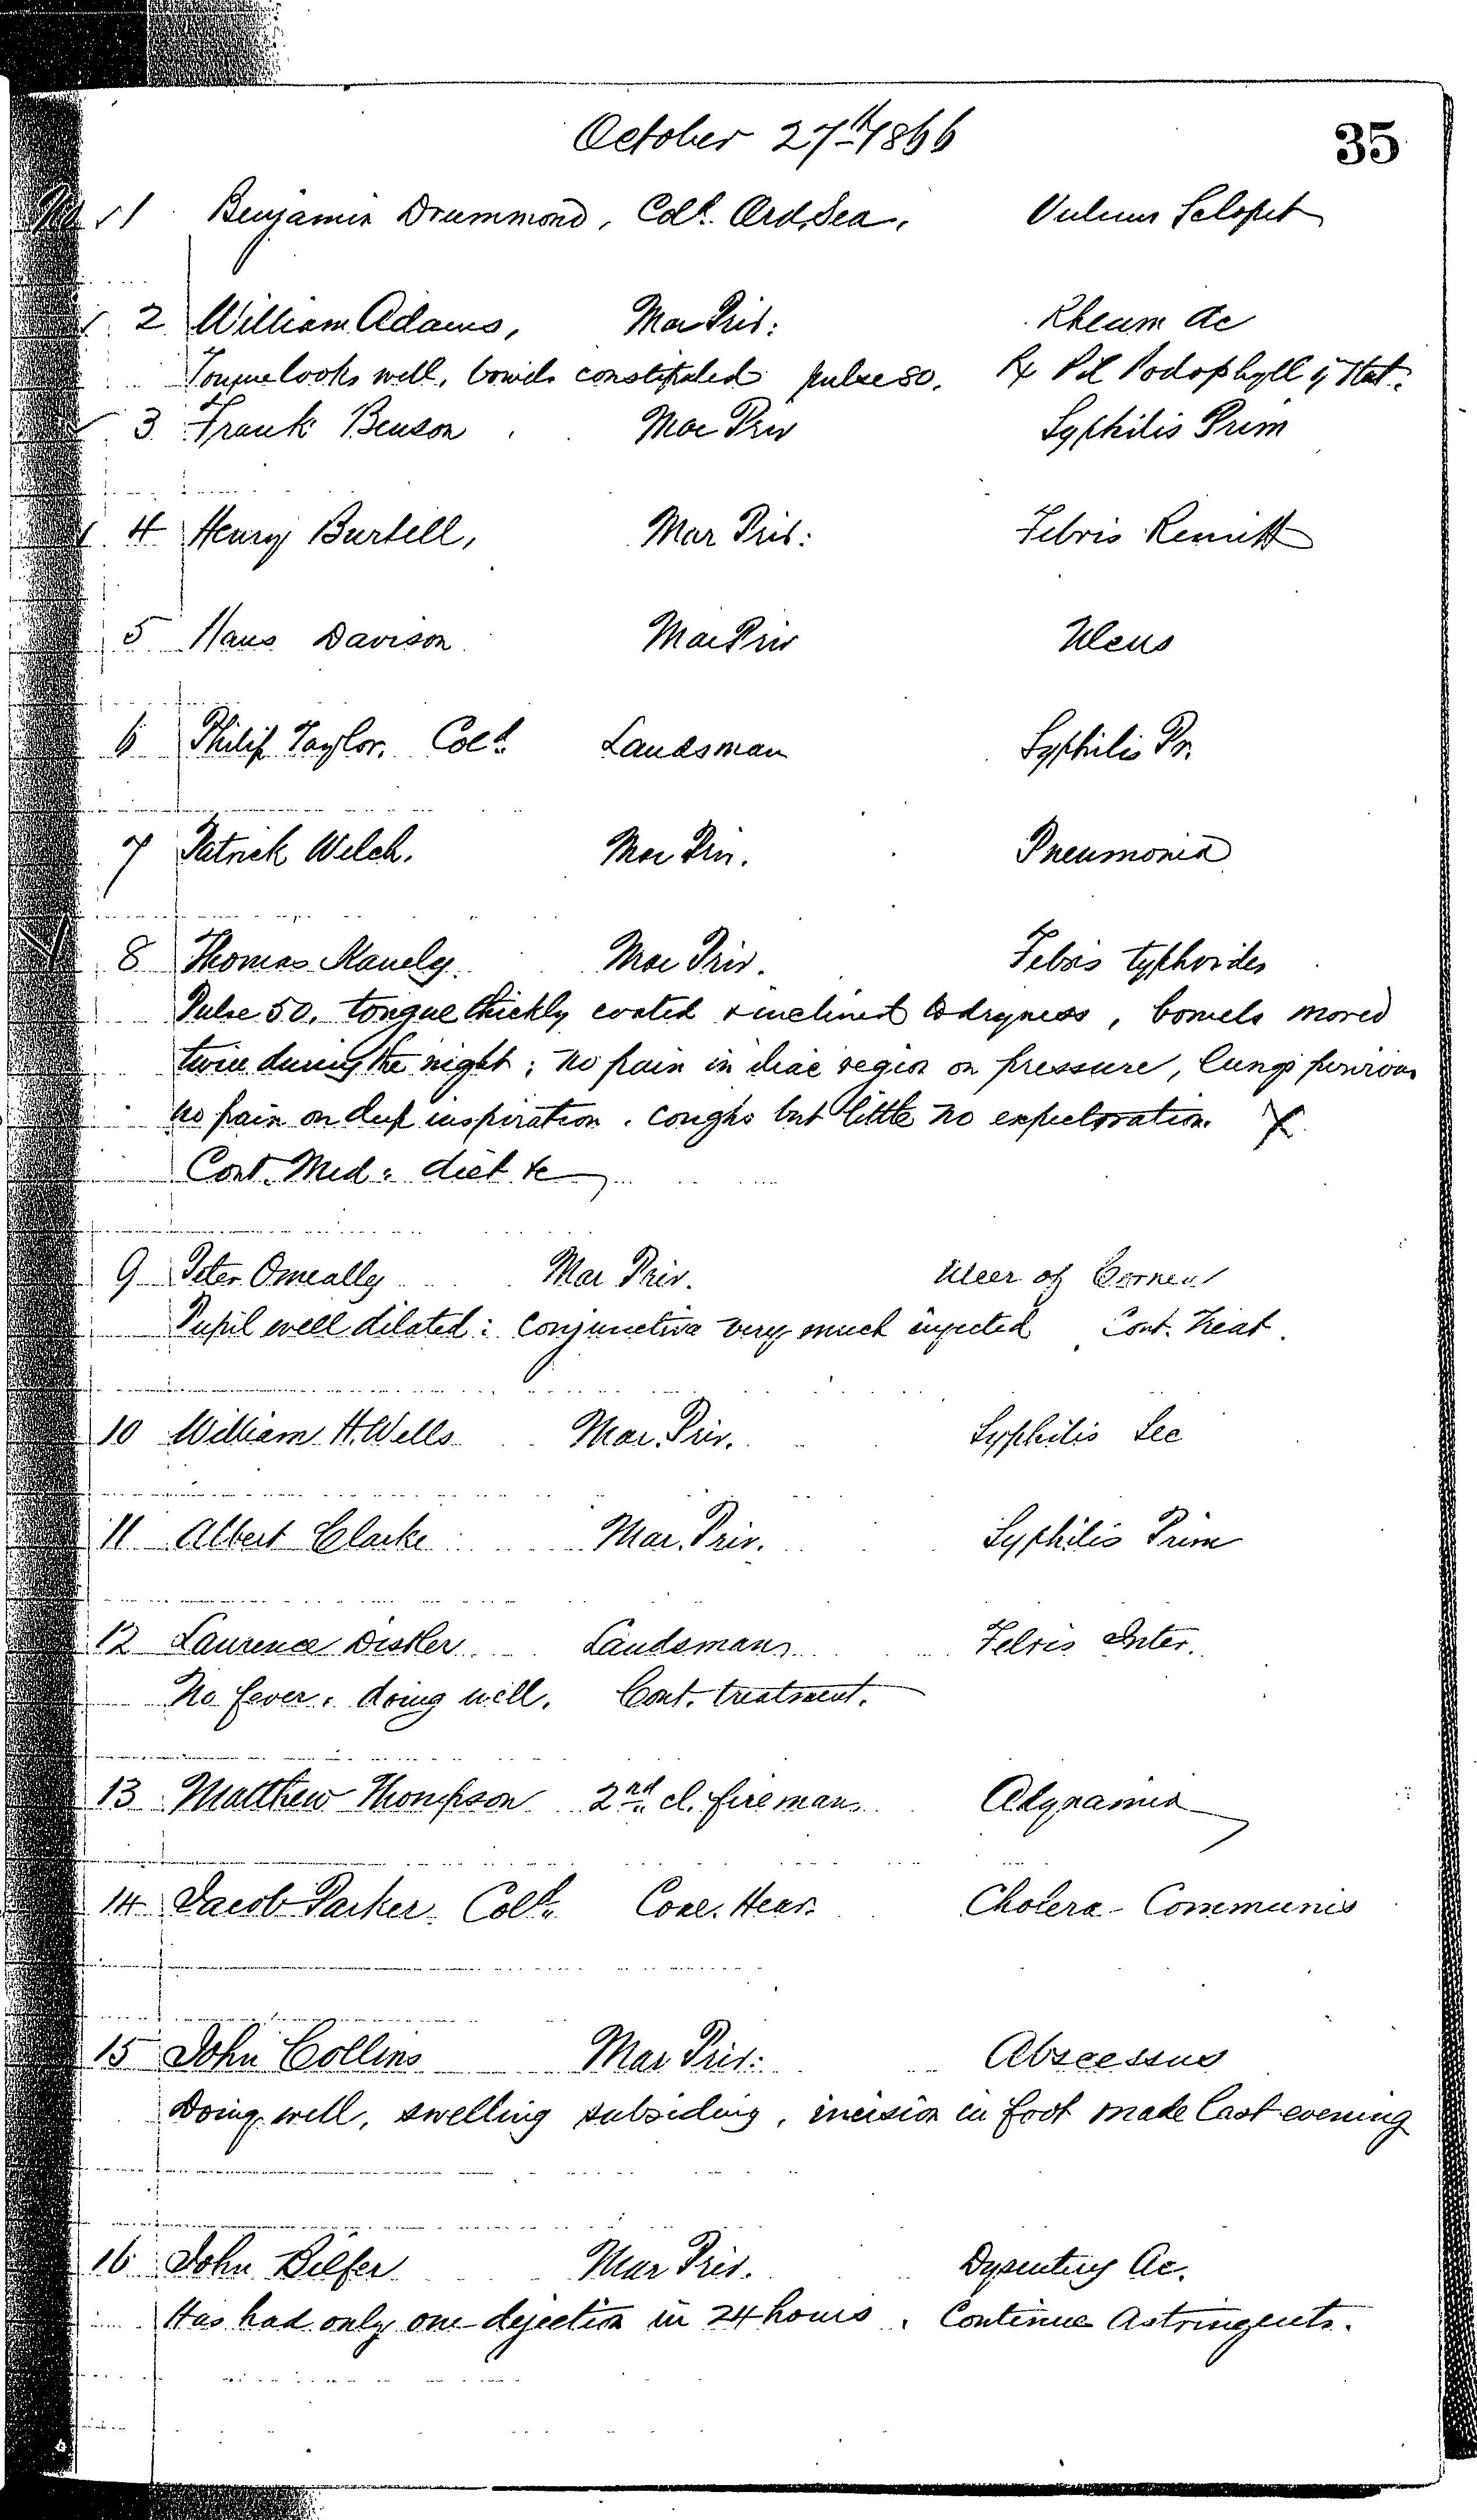 Patients in the Naval Hospital, Washington DC, on October 27, 1866, page 1 of 2, in the Medical Journal, October 1, 1866 to March 20, 1867